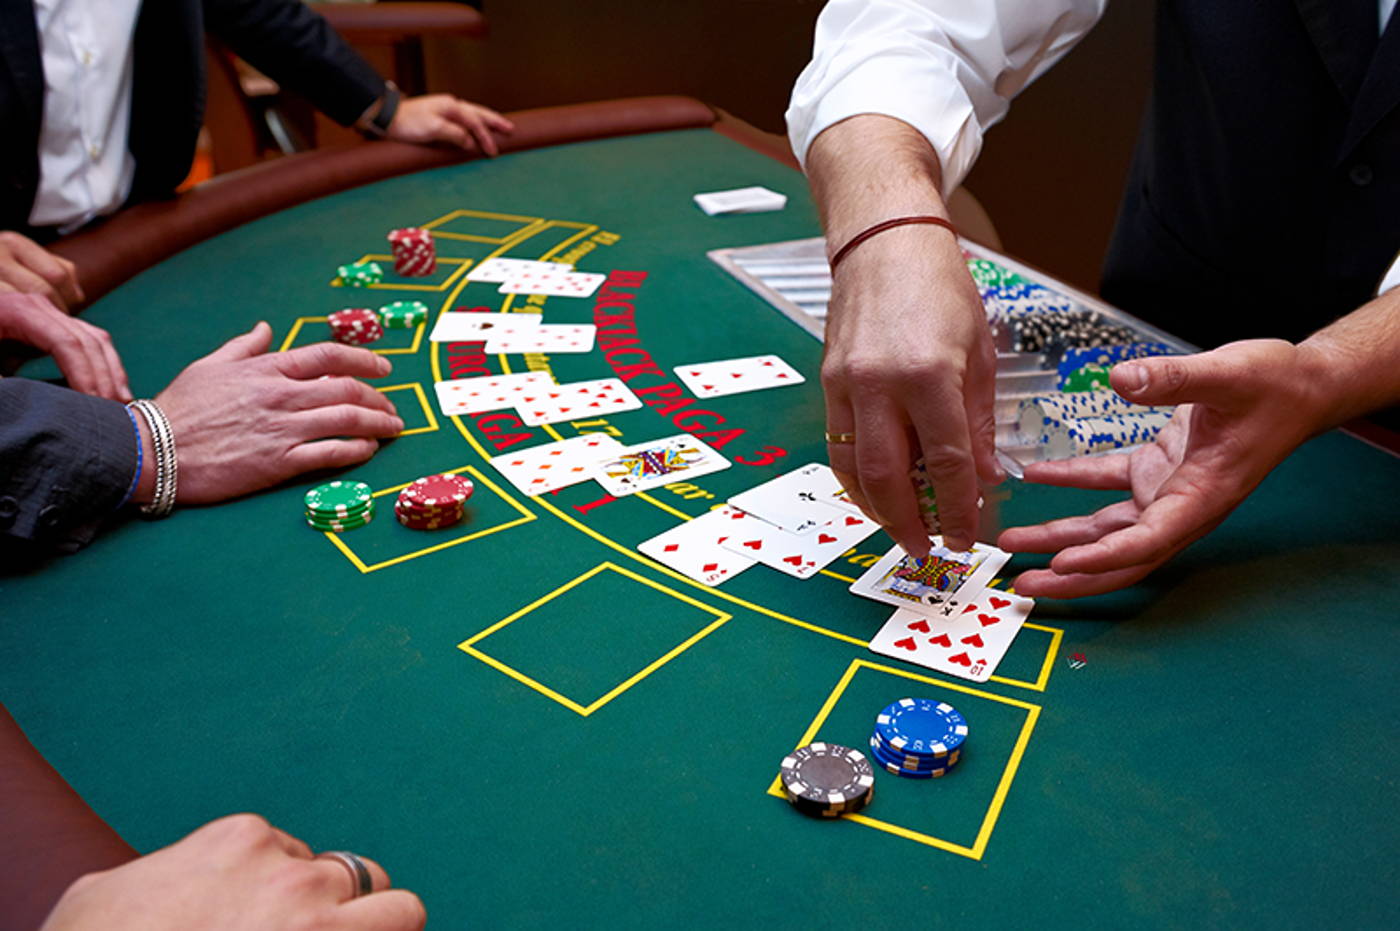 A First-Timer's Guide to Casino Table Games